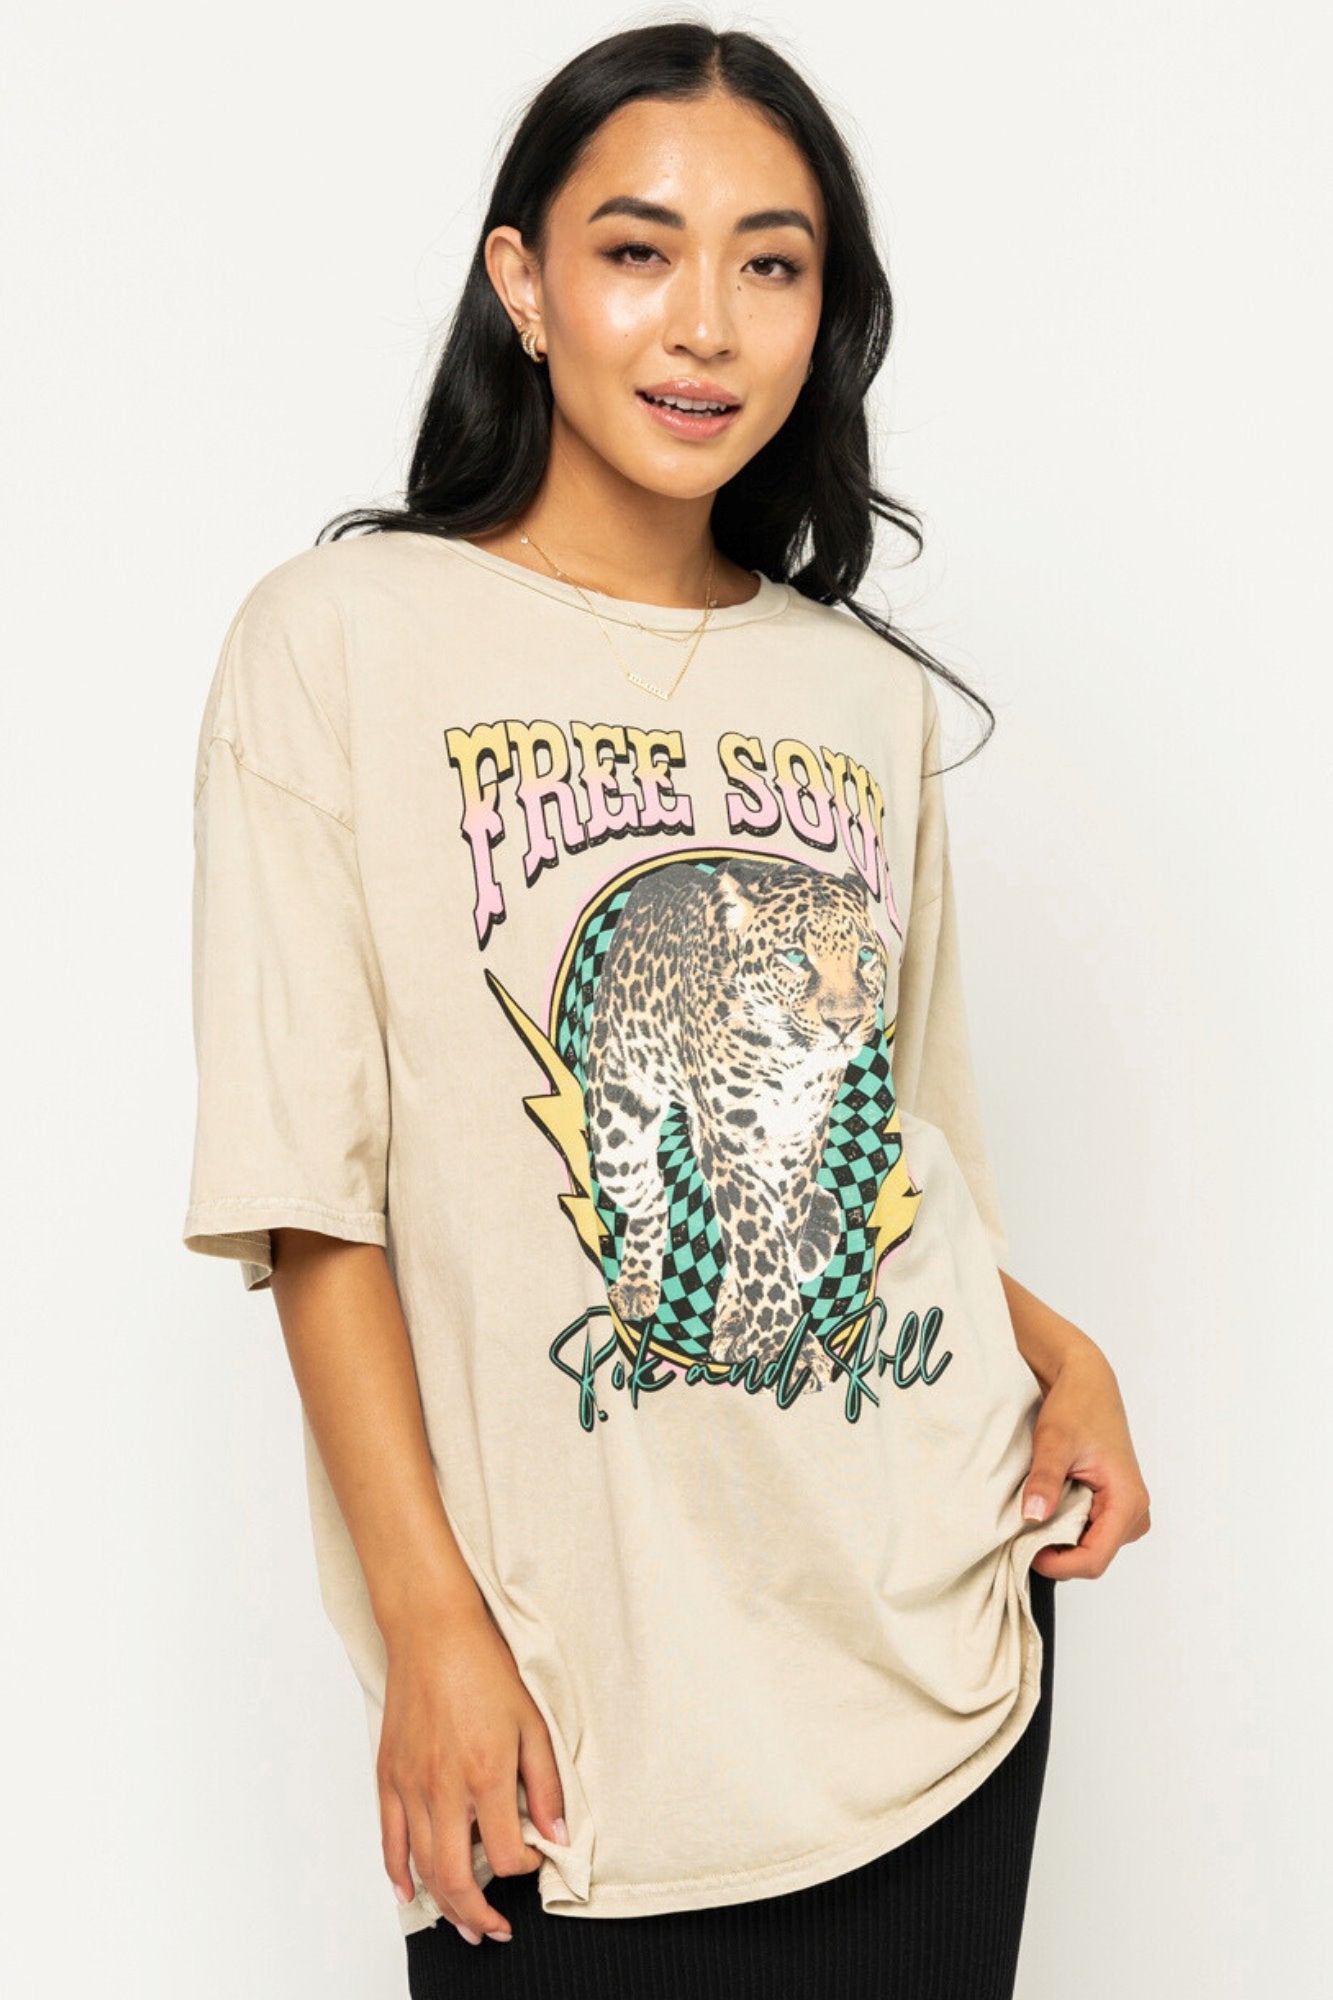 MY OVERSIZED GRAPHIC T-SHIRT COLLECTION  Tees Try-On (Urban Outfitters,  Project Social T + More) 